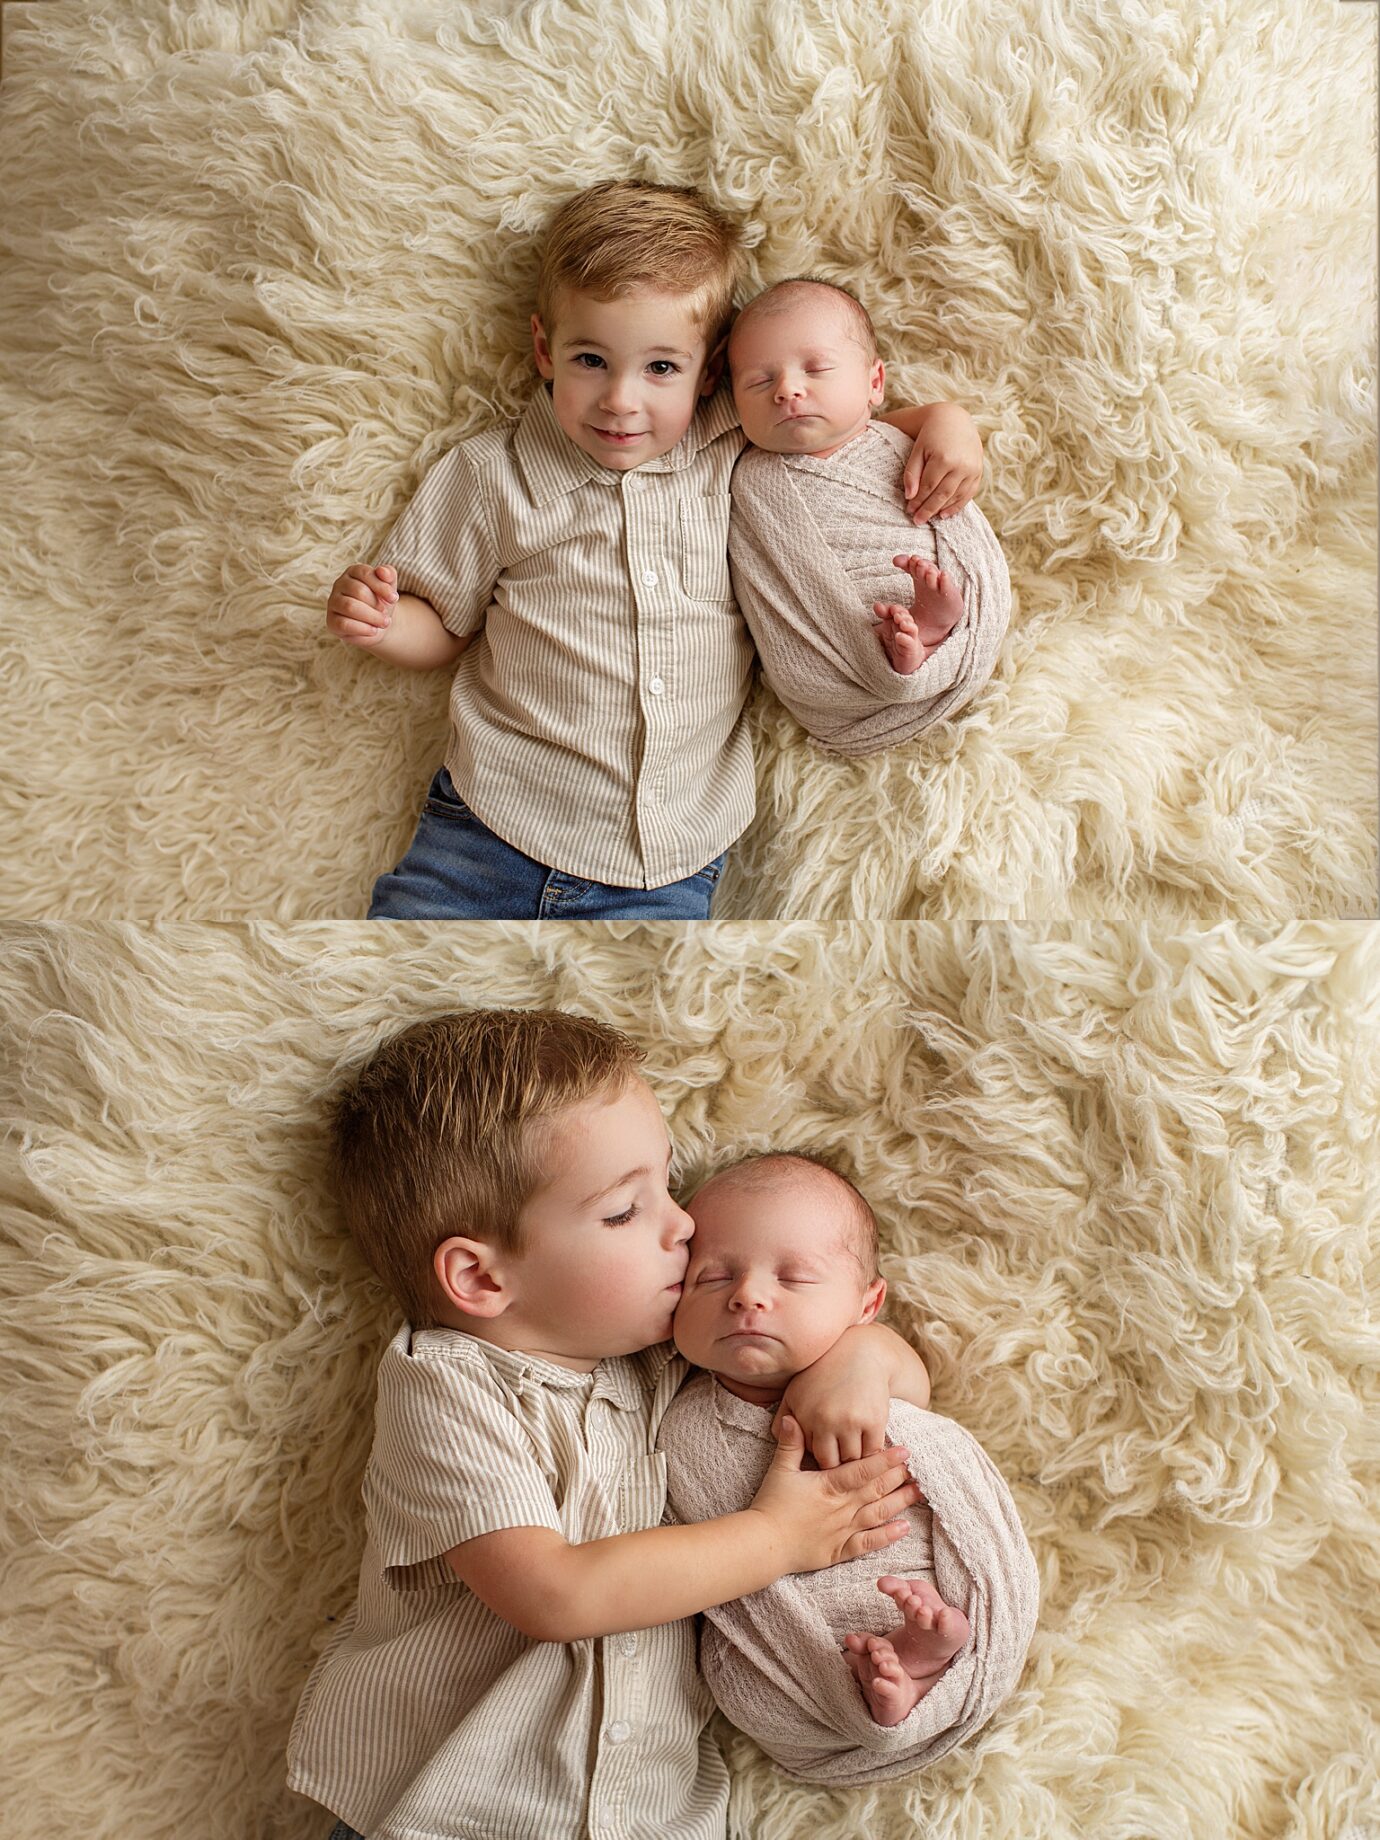 St. Louis newborn photographer, perryville Missouri newborn photographer, farmington newborn photographer, siblings, brother holding baby, fuzzy white rug, smiling at camera